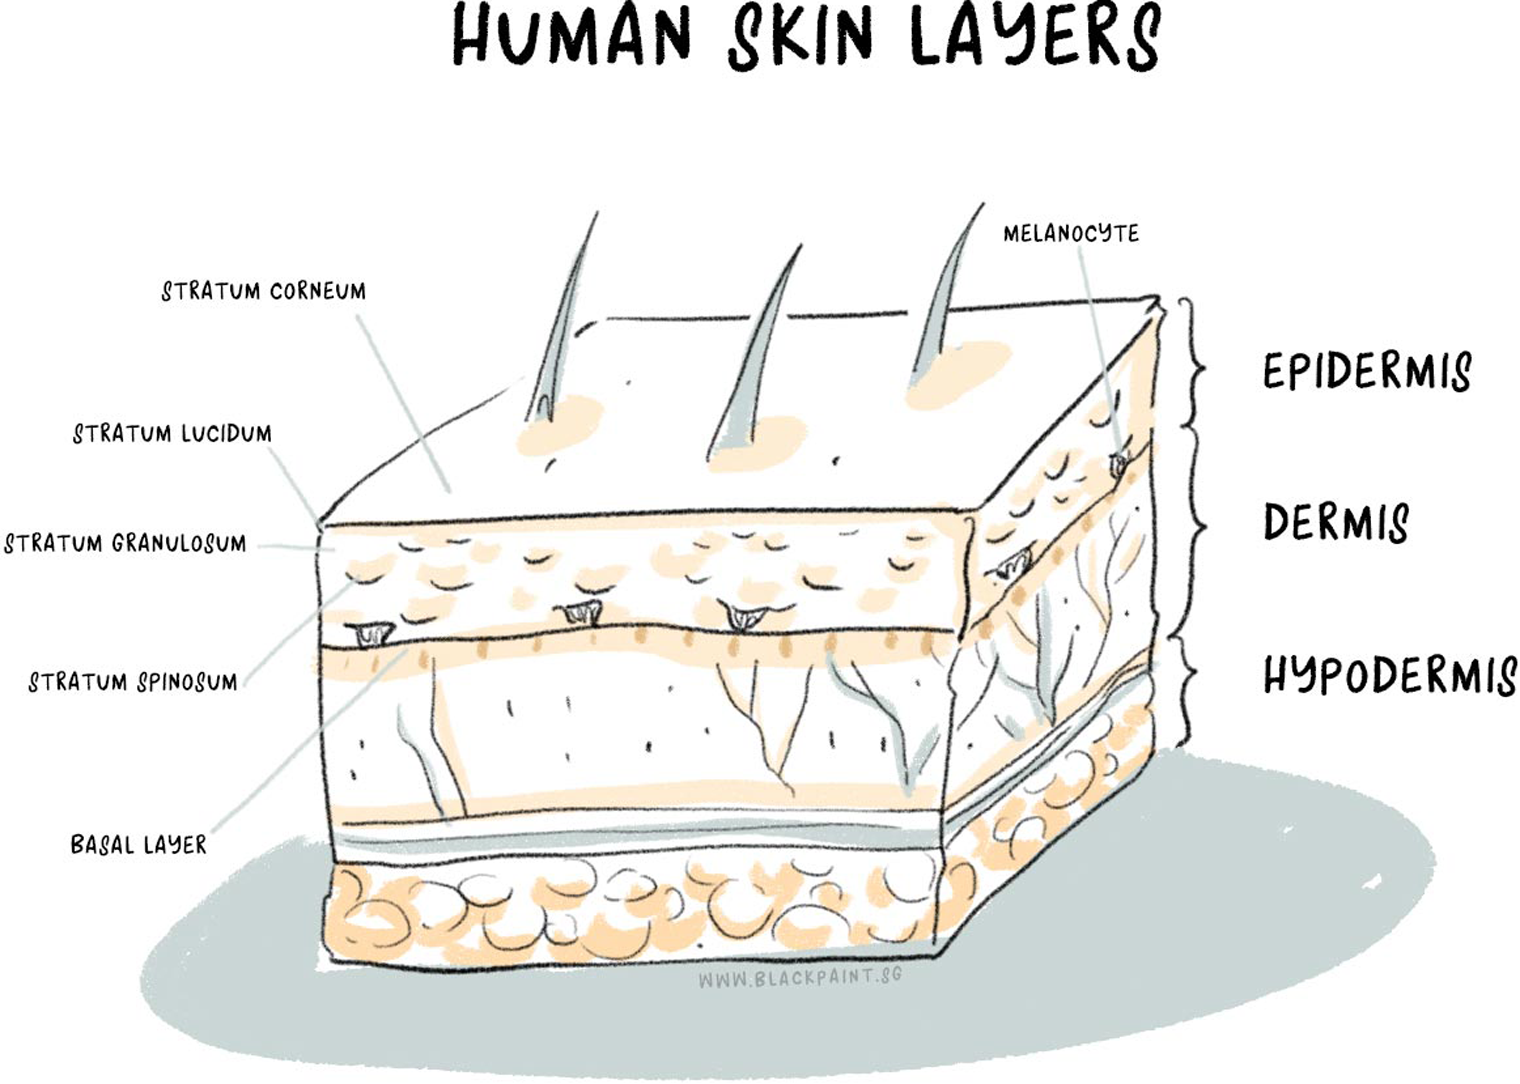 Our human skin is made up of many layers